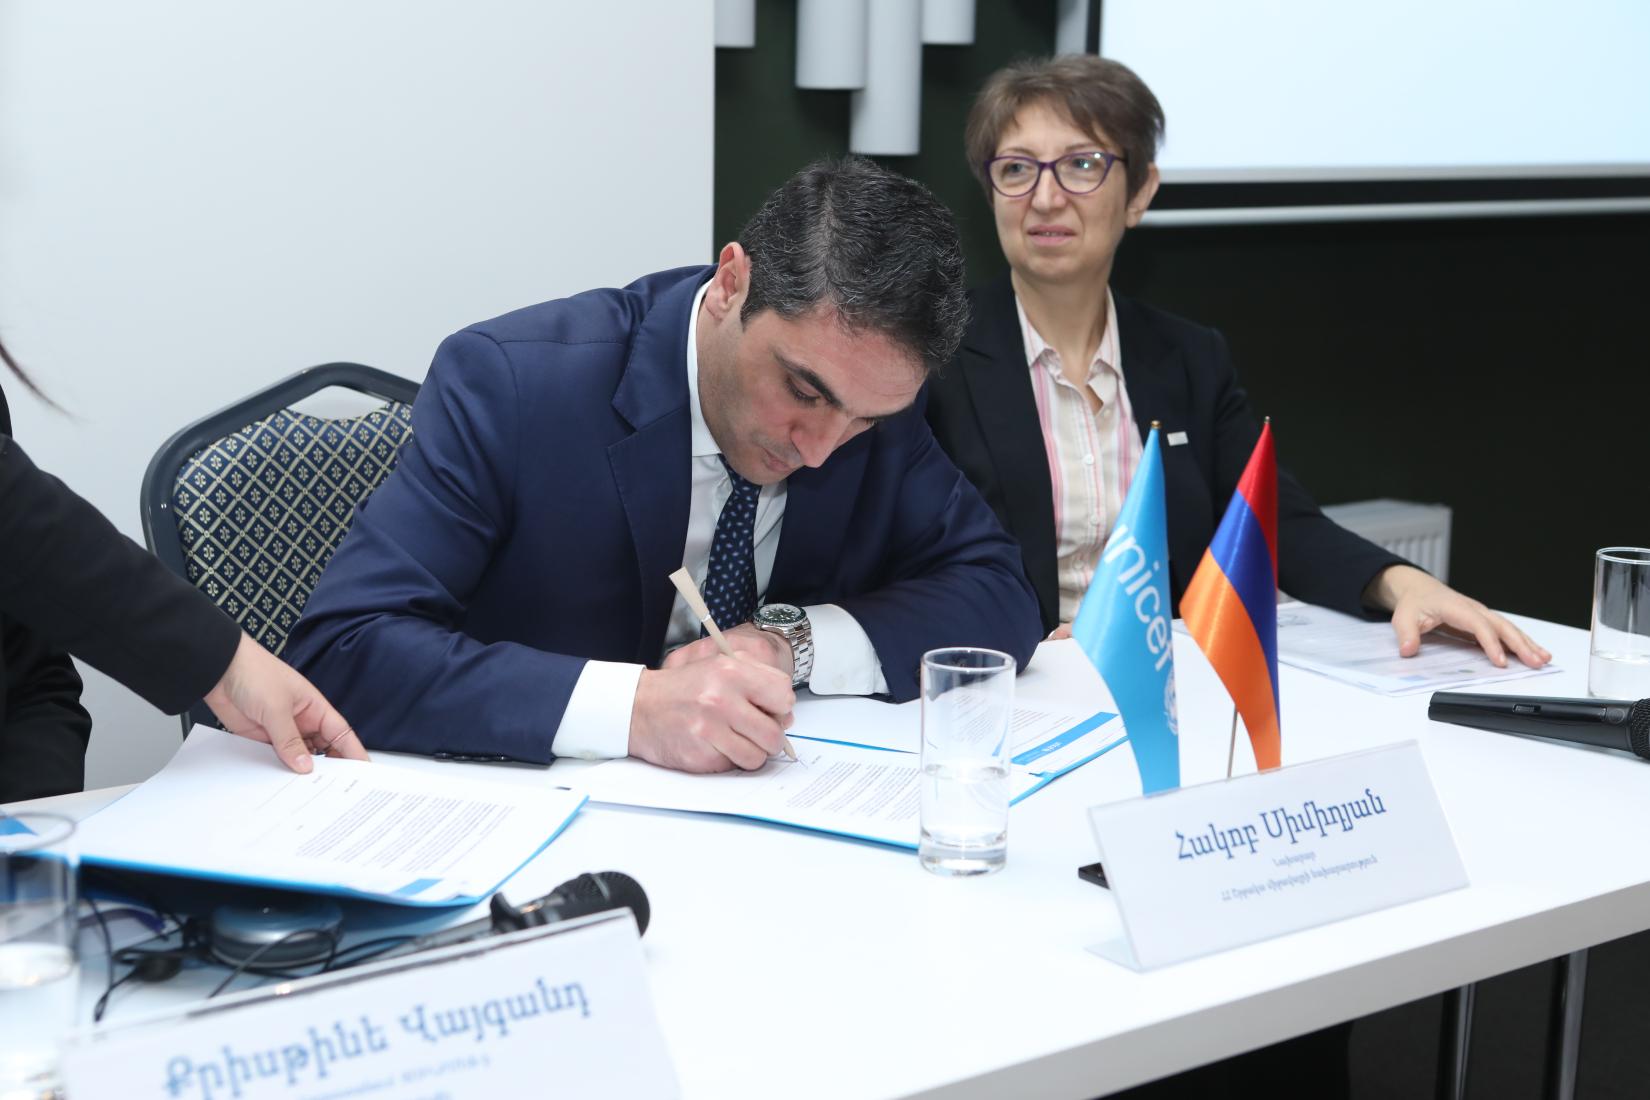 The Minister of Environment of the Republic of Armenia, signing the Intergovernmental Declaration on Children, Youth and Climate Action. 